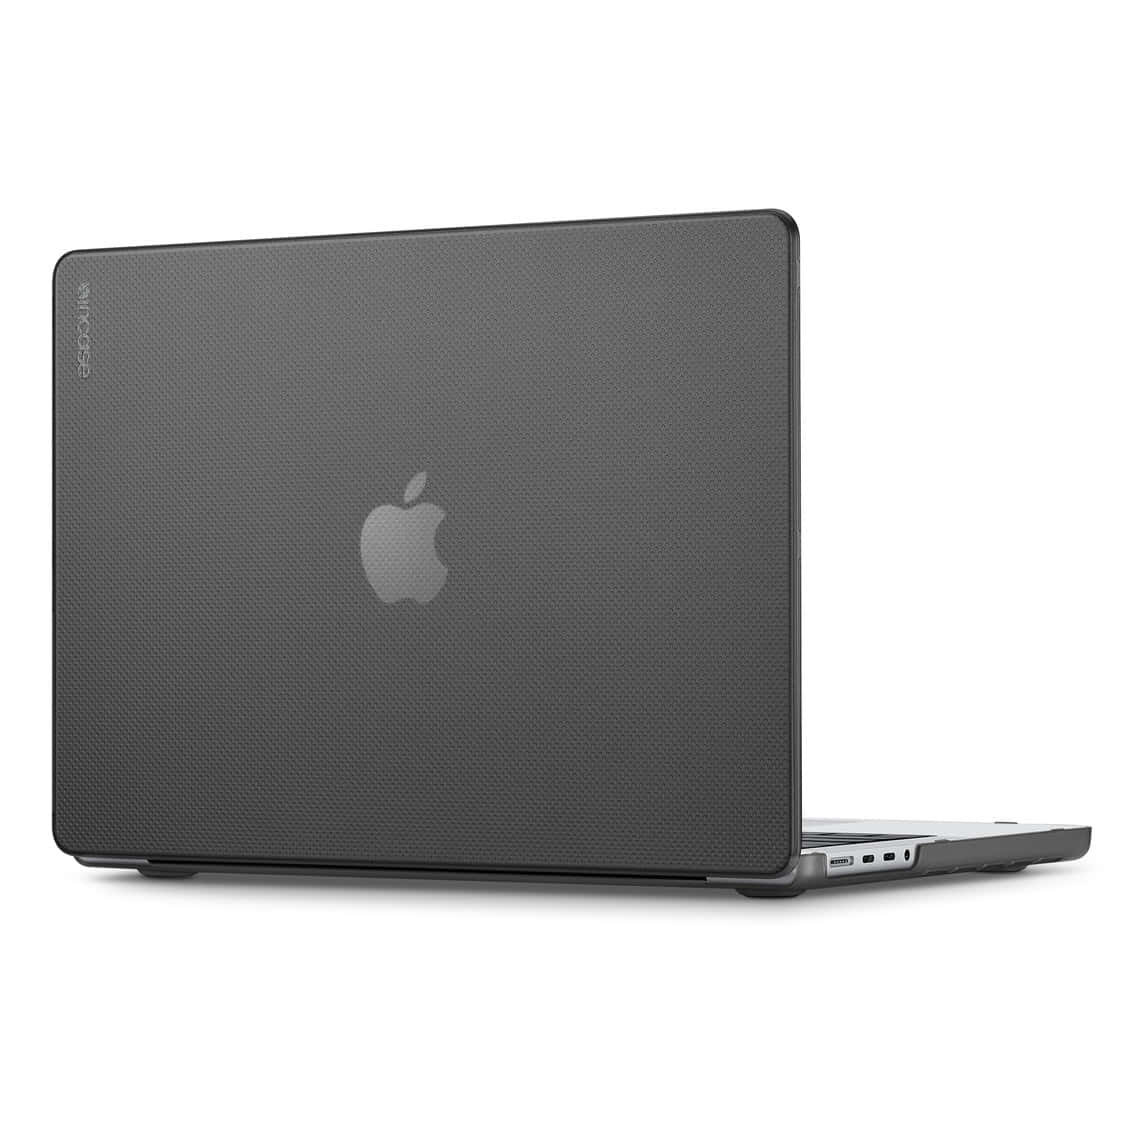 Look sleek and sophisticated with a black MacBook Wallpaper